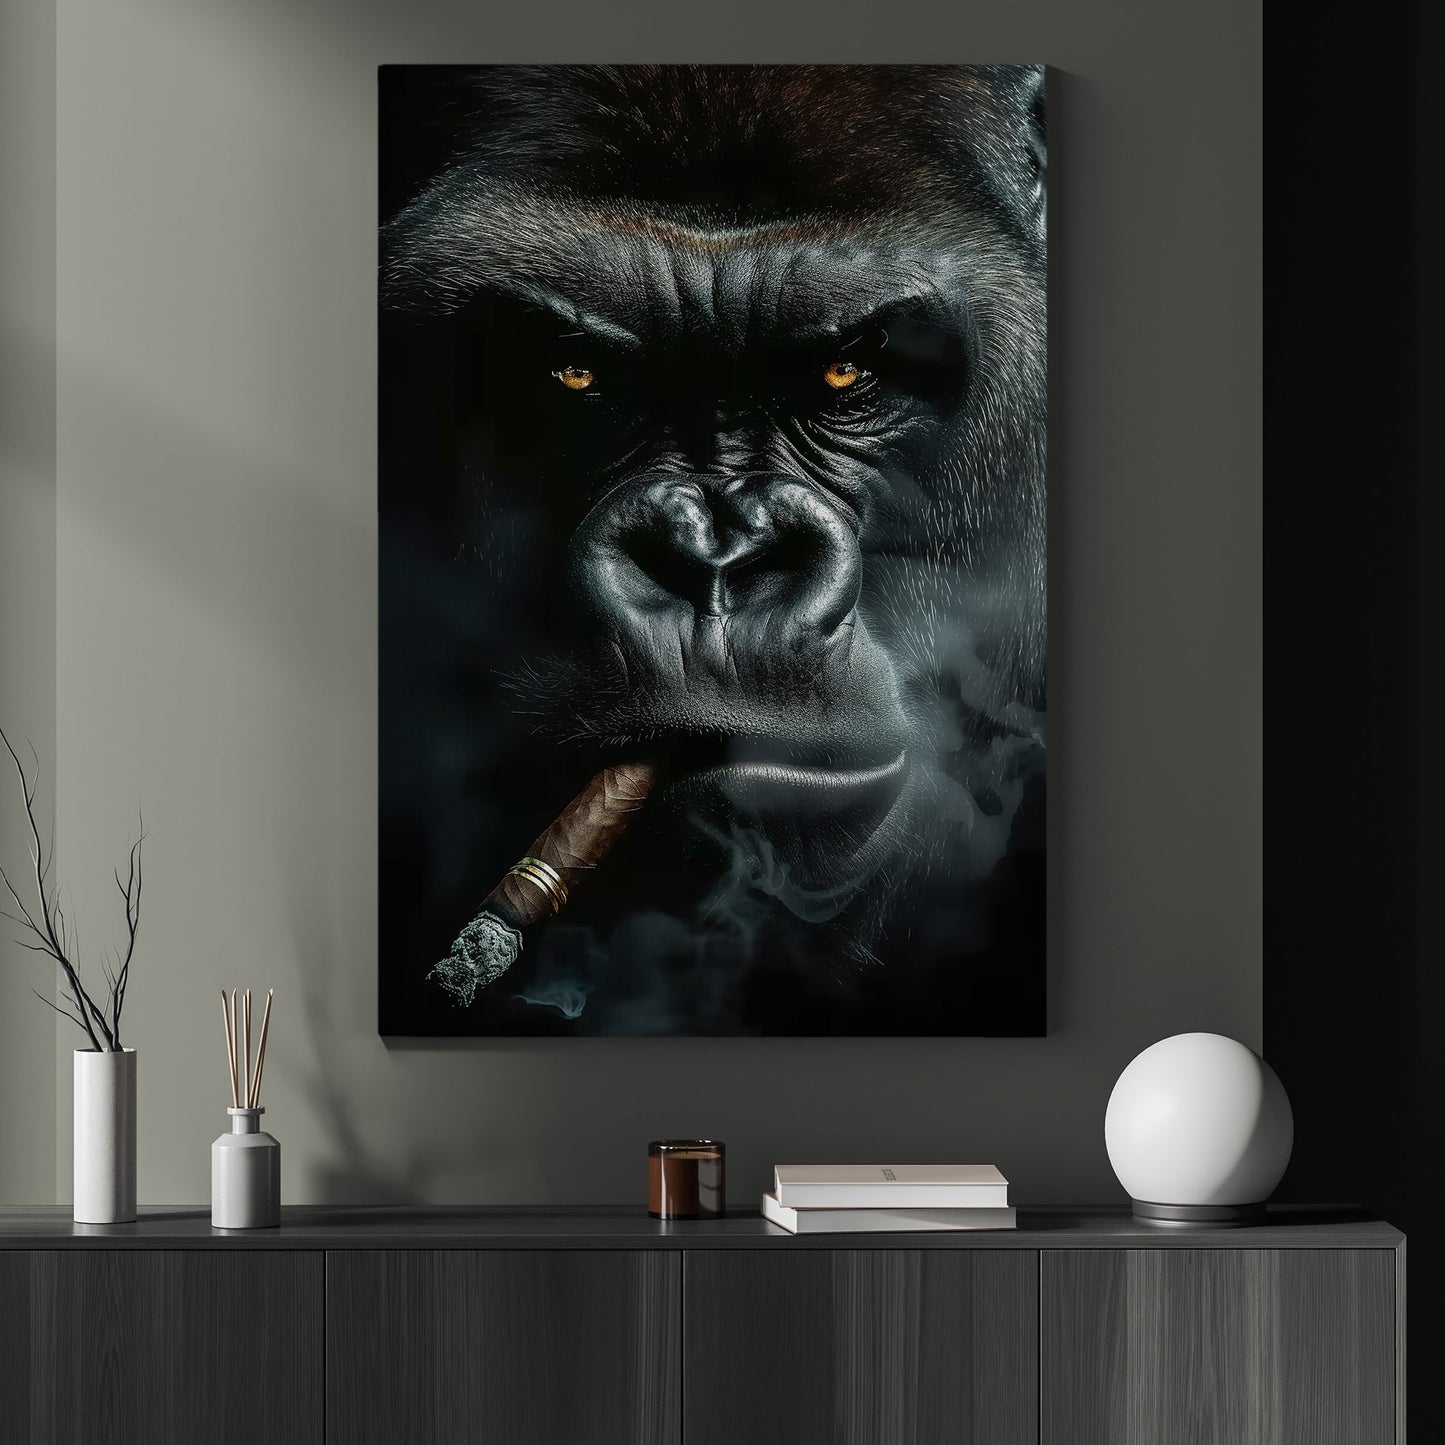 Gangster Monkey Cigar Gorilla, Victorian Monkey Canvas Painting, Victorian Animal Wall Art Decor, Poster Gift For Monkey Lovers